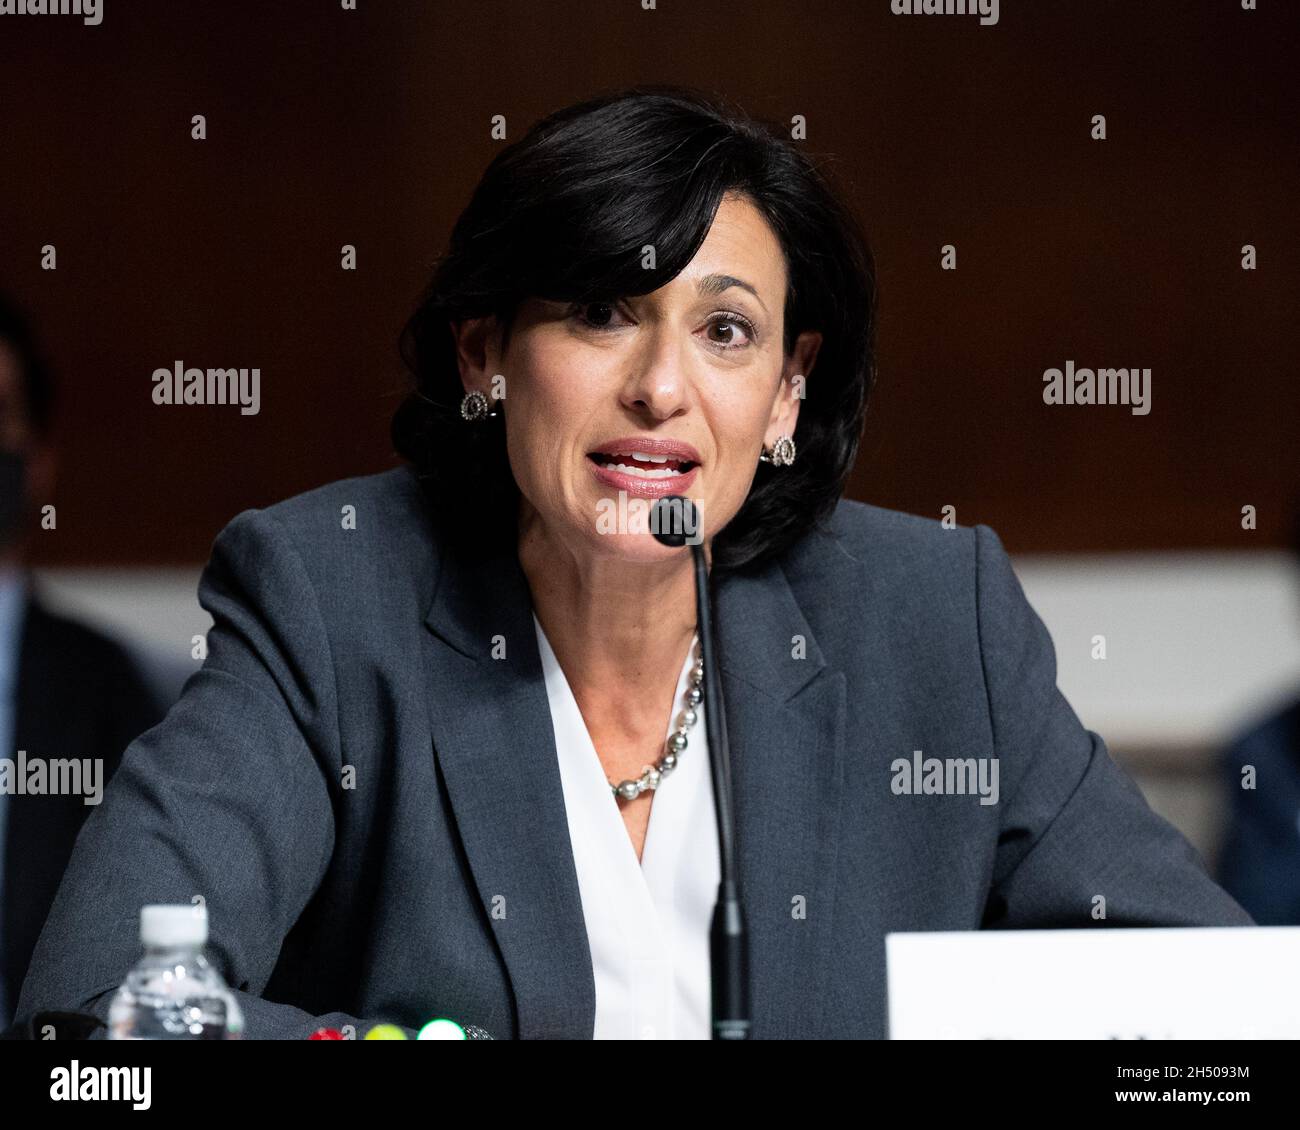 Dr. Rochelle Walensky, Director of the Centers for Disease Control and Prevention, speaking at a hearing of the Senate Health, Education, Labor, and Pensions Committee. Stock Photo